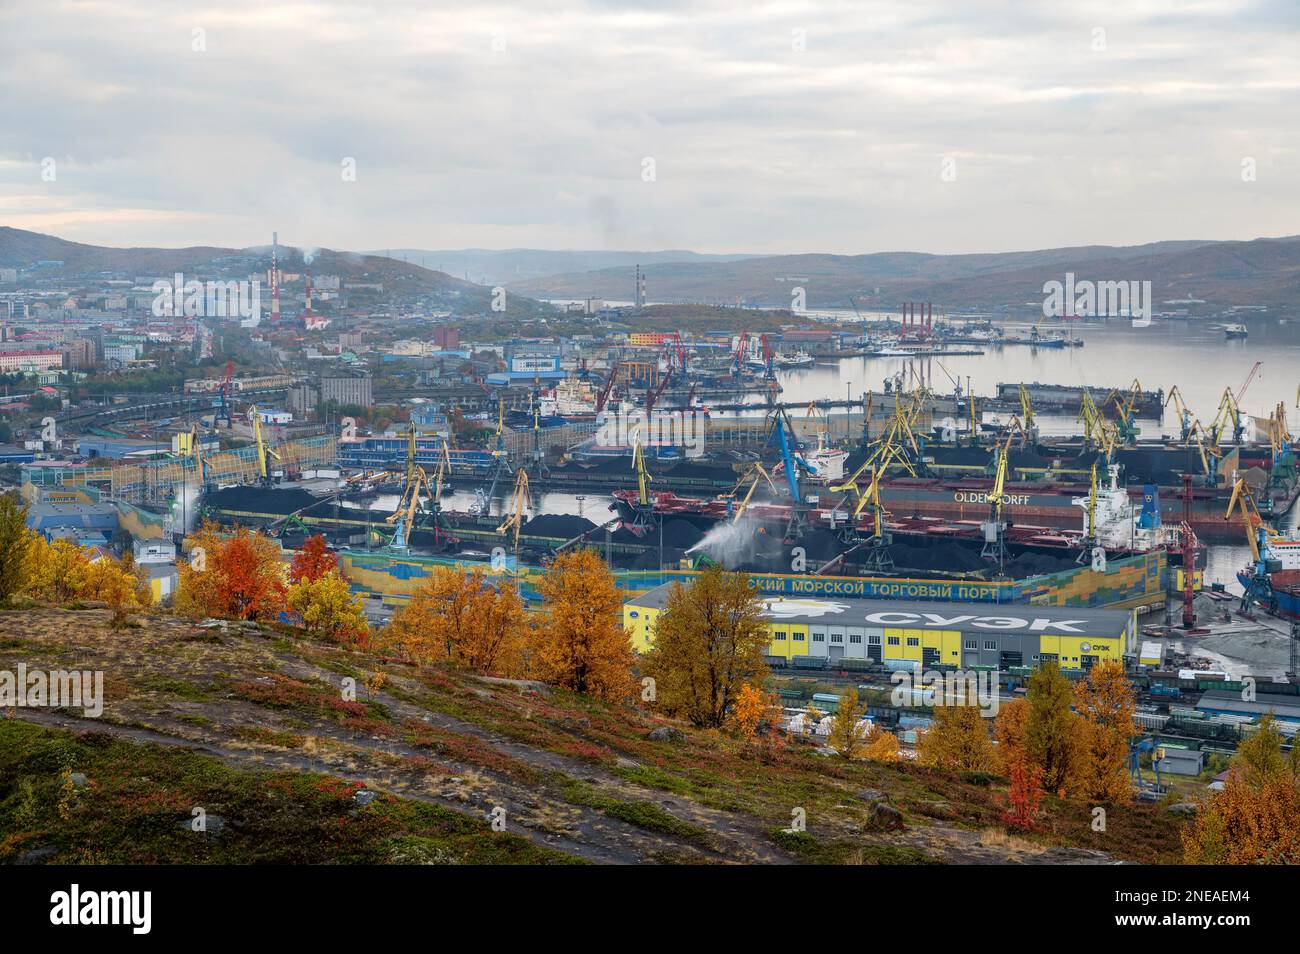 MURMANSK, RUSSIA - SEPTEMBER 17, 2021: Murmansk commercial sea port. Kola bay. A trading port in autumn, lots of ships in the bay, with yellow trees a Stock Photo